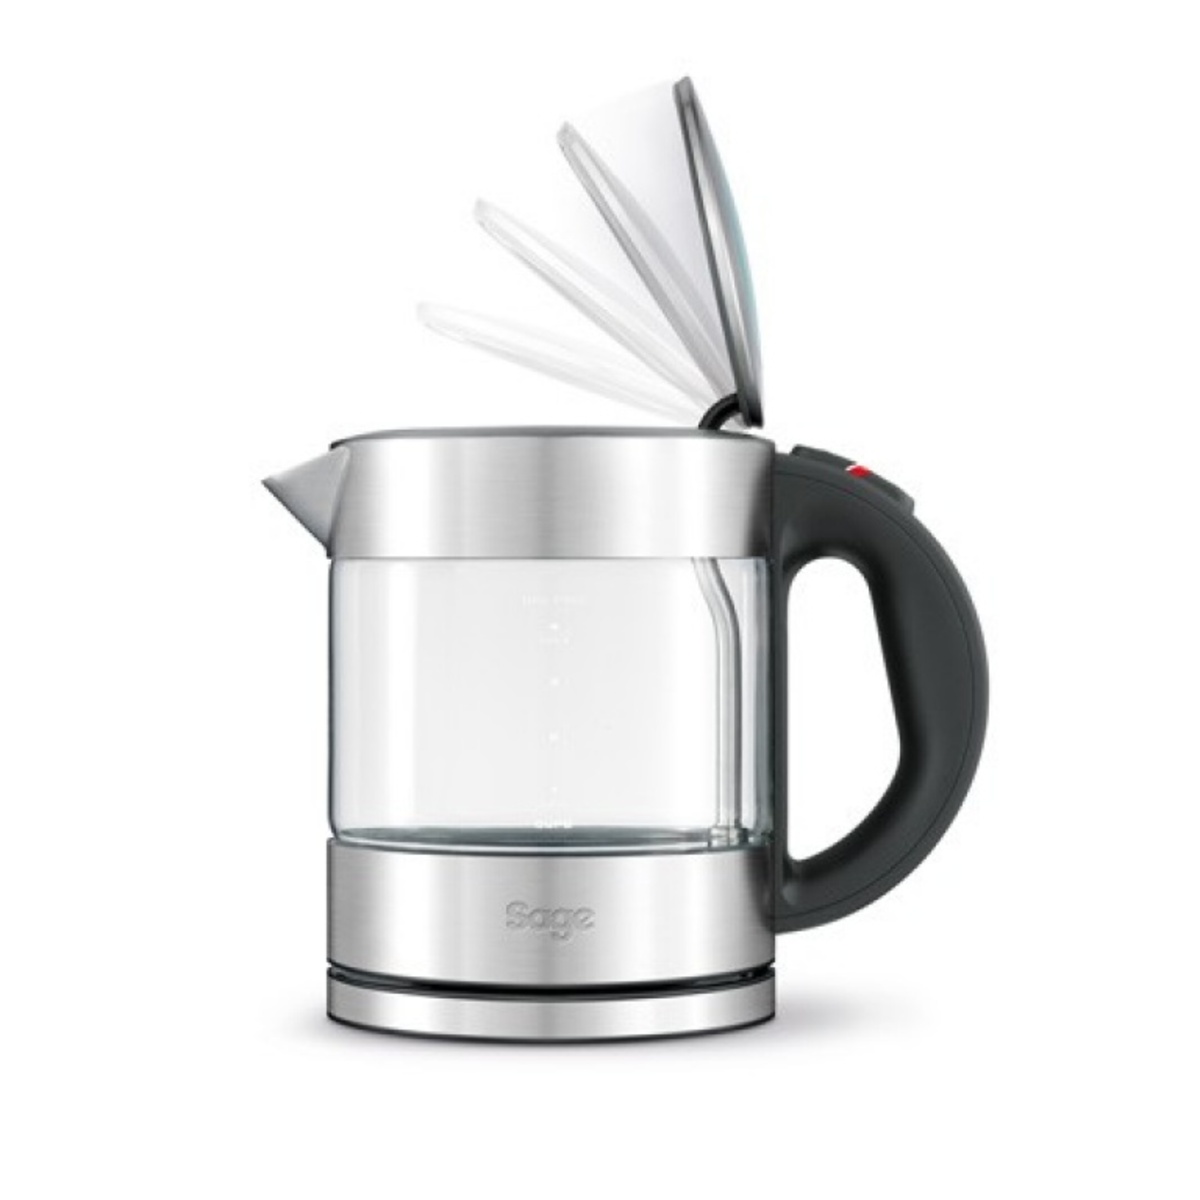 Sage BKE395UK The Compact Pure 1.0L Kettle